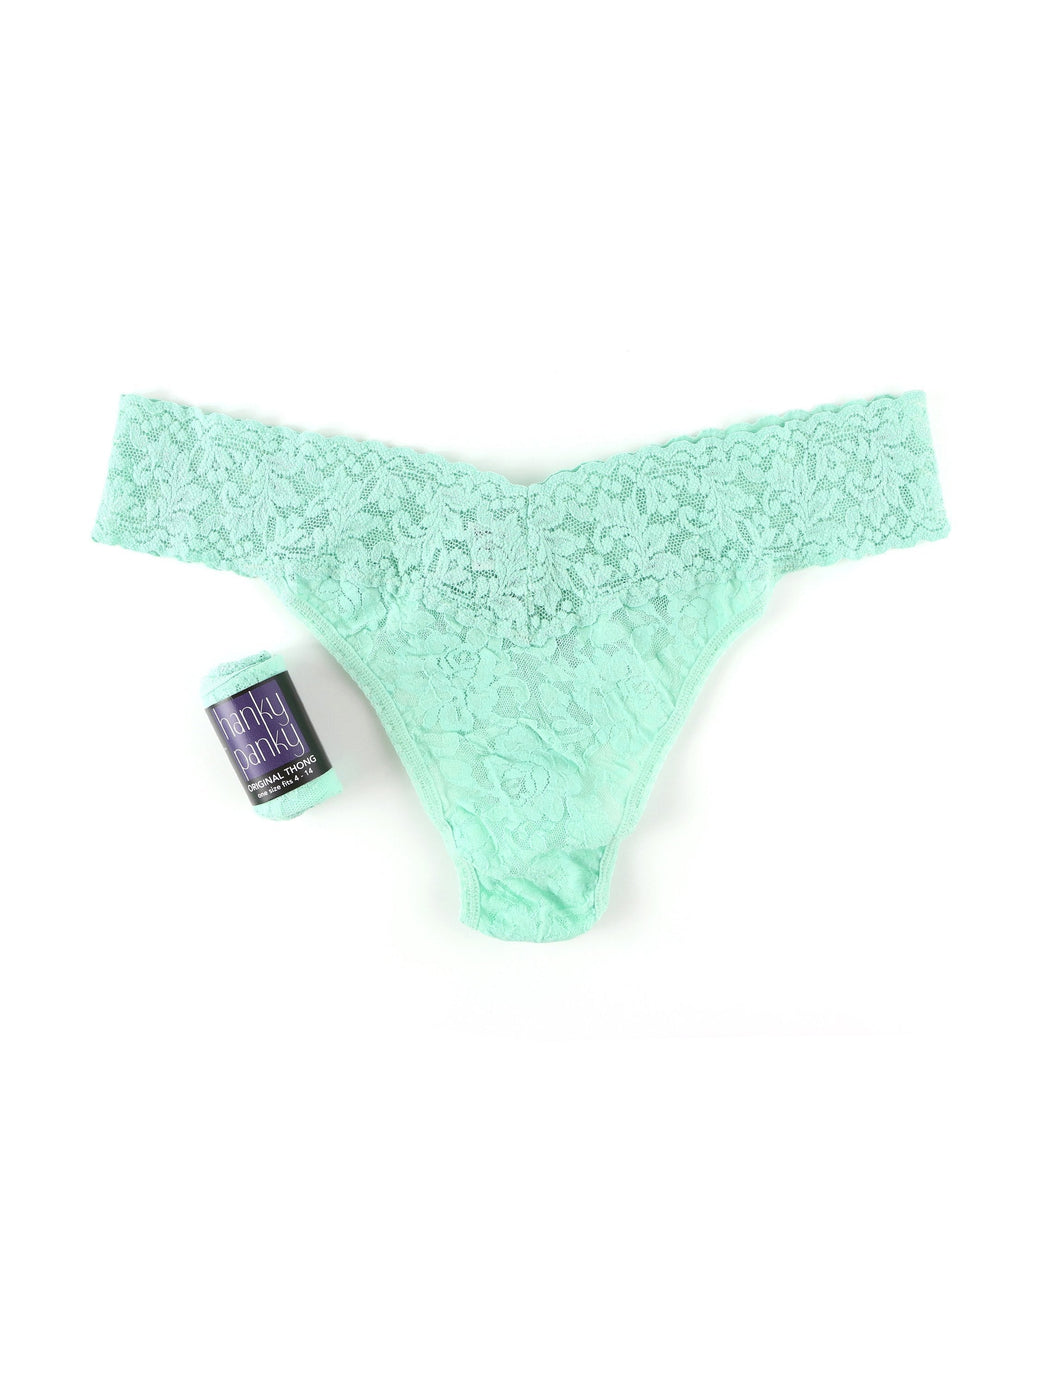 Signature Lace Original Rise Thong-MINT SPRIG GREEN-Hanky Panky